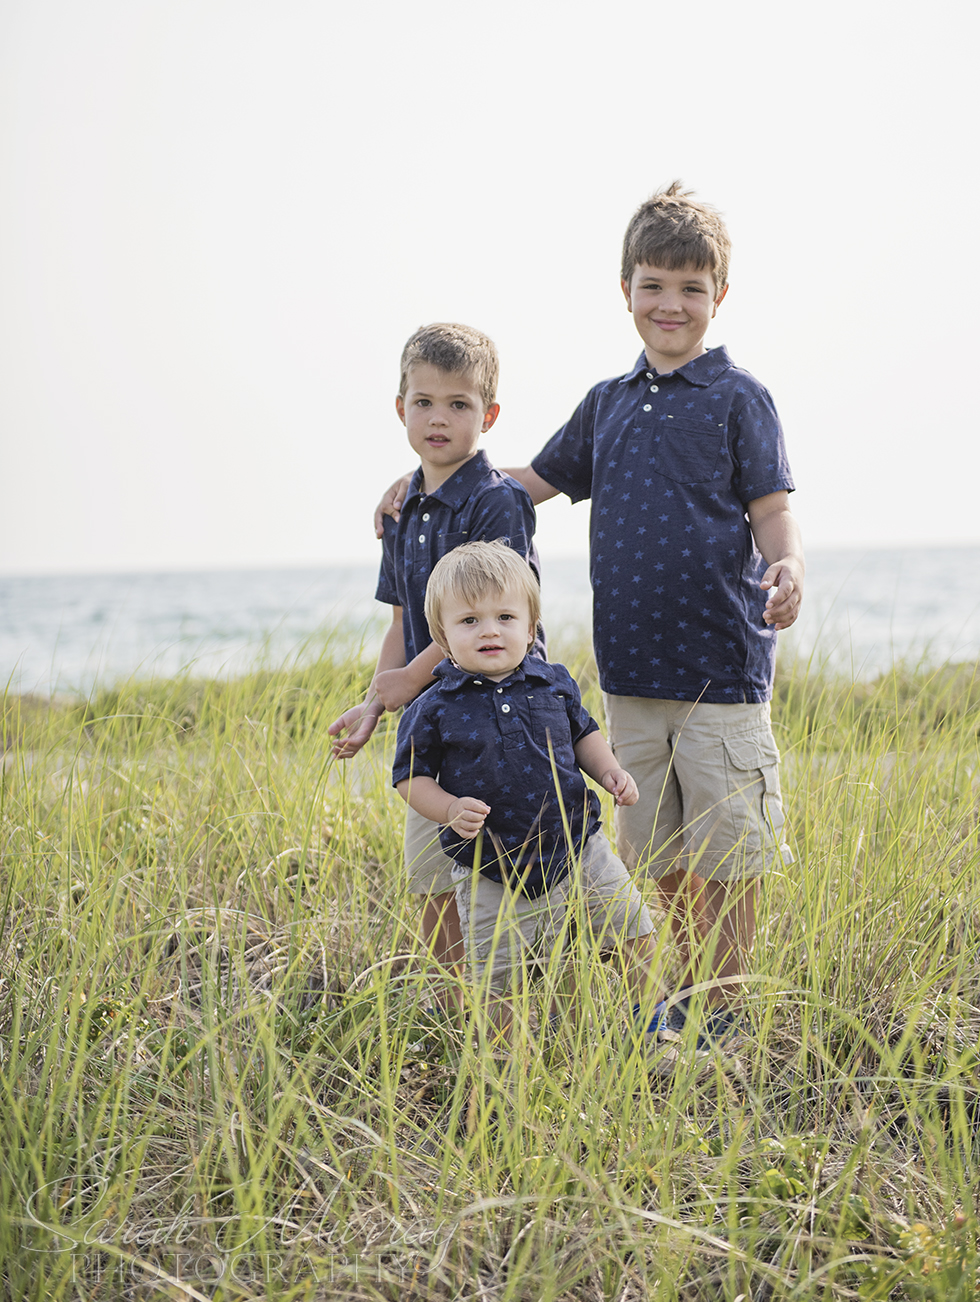 Cape Cod Family Photo Session in Falmouth, Cape Cod, Massachusetts - Sarah Murray Photography